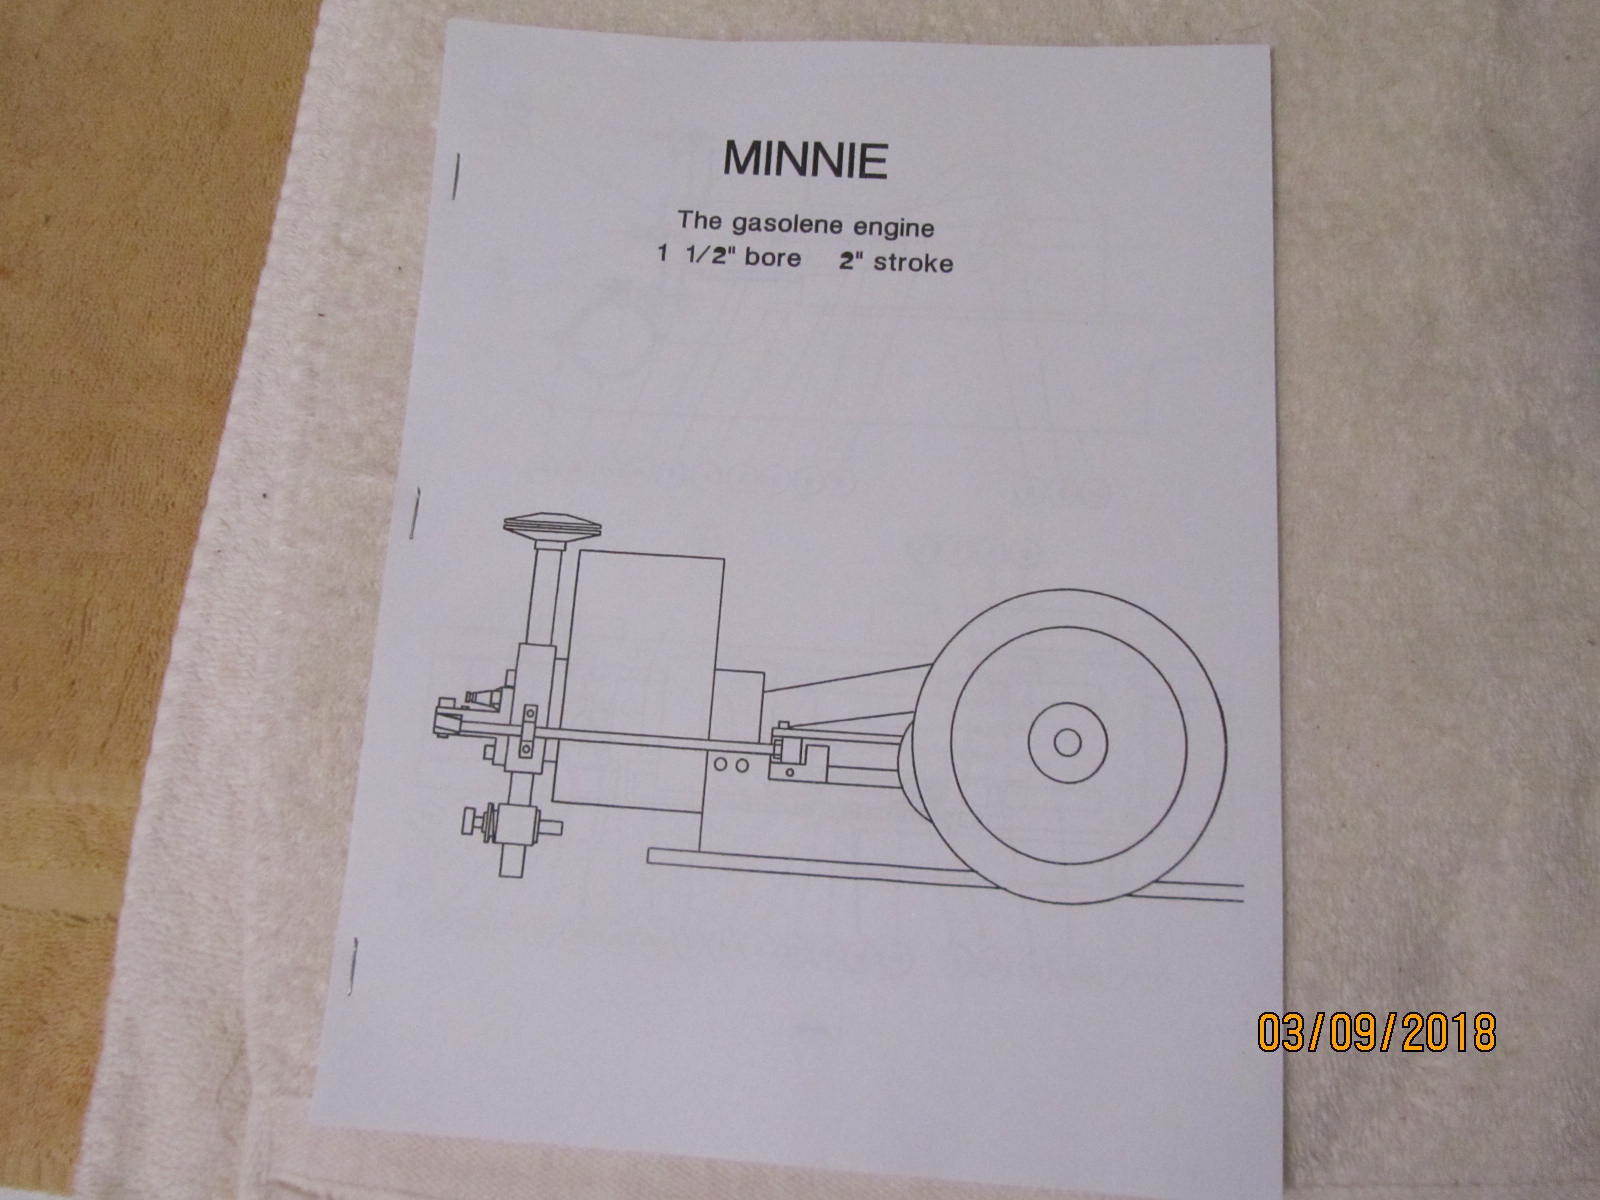 Minnie Small Gas Engine Blueprints Plans, Hit and Miss model. No Castings Needed